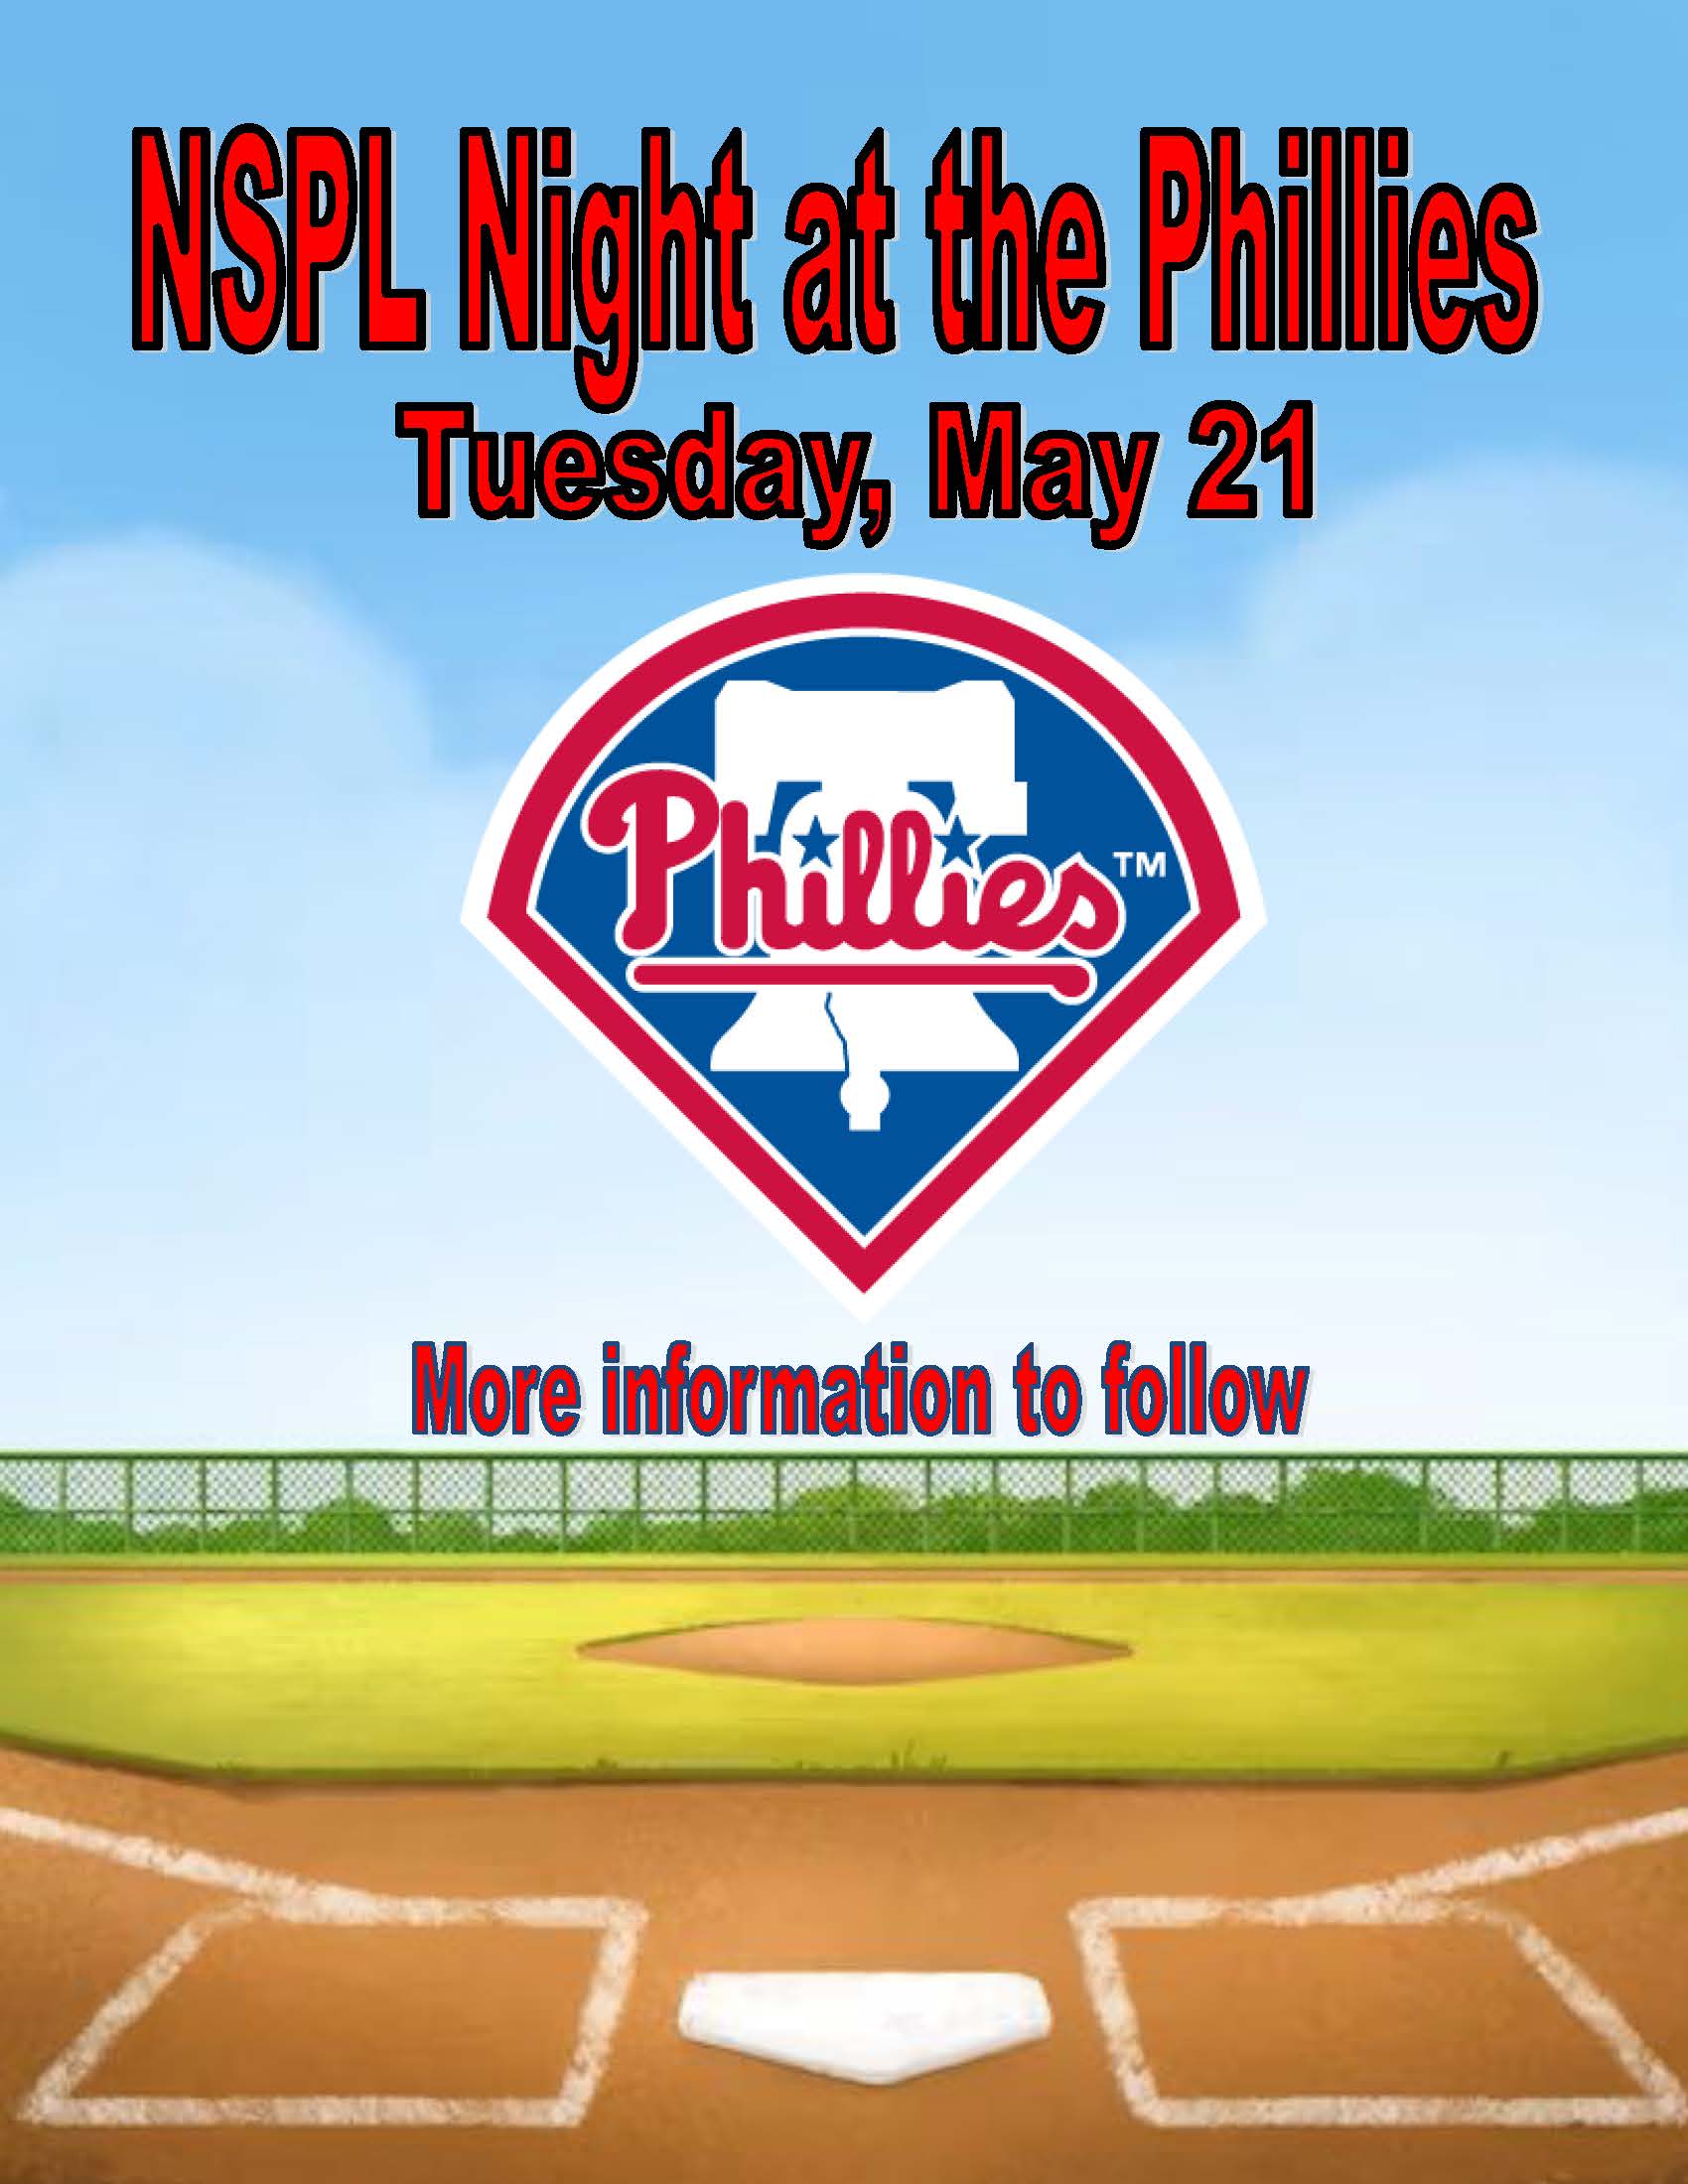 NSPL Night at the Phillies